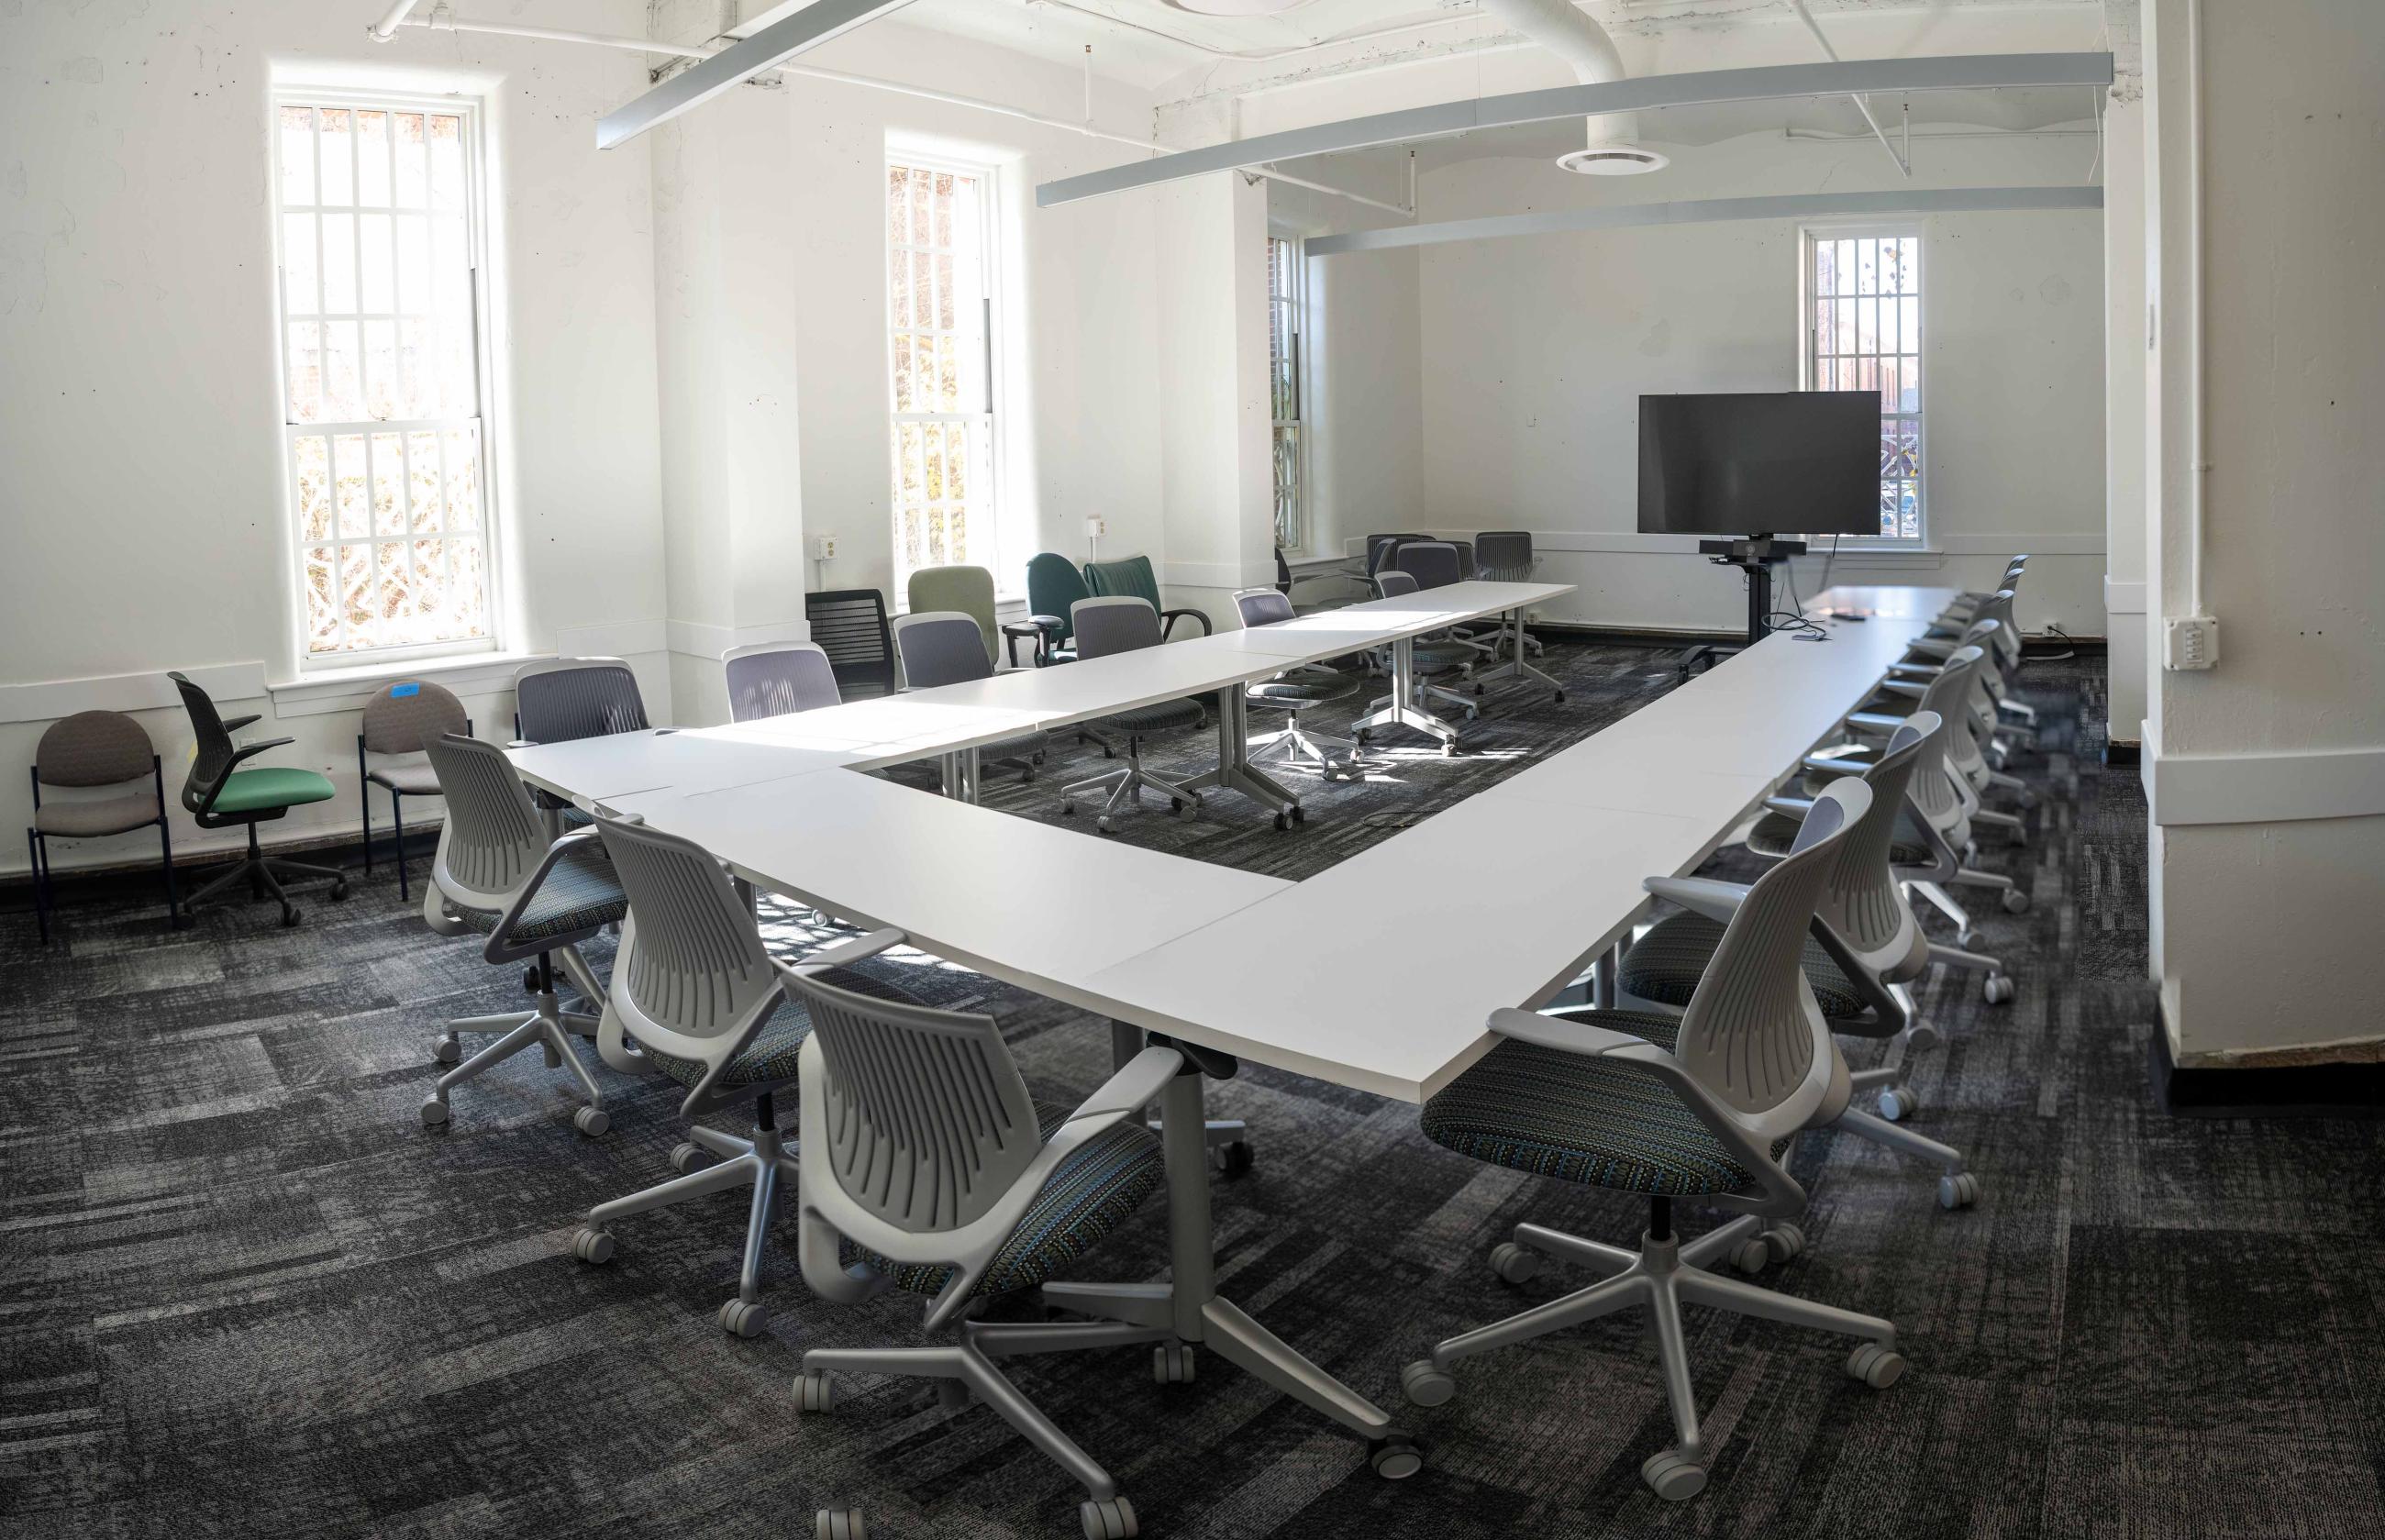 Round table conference room